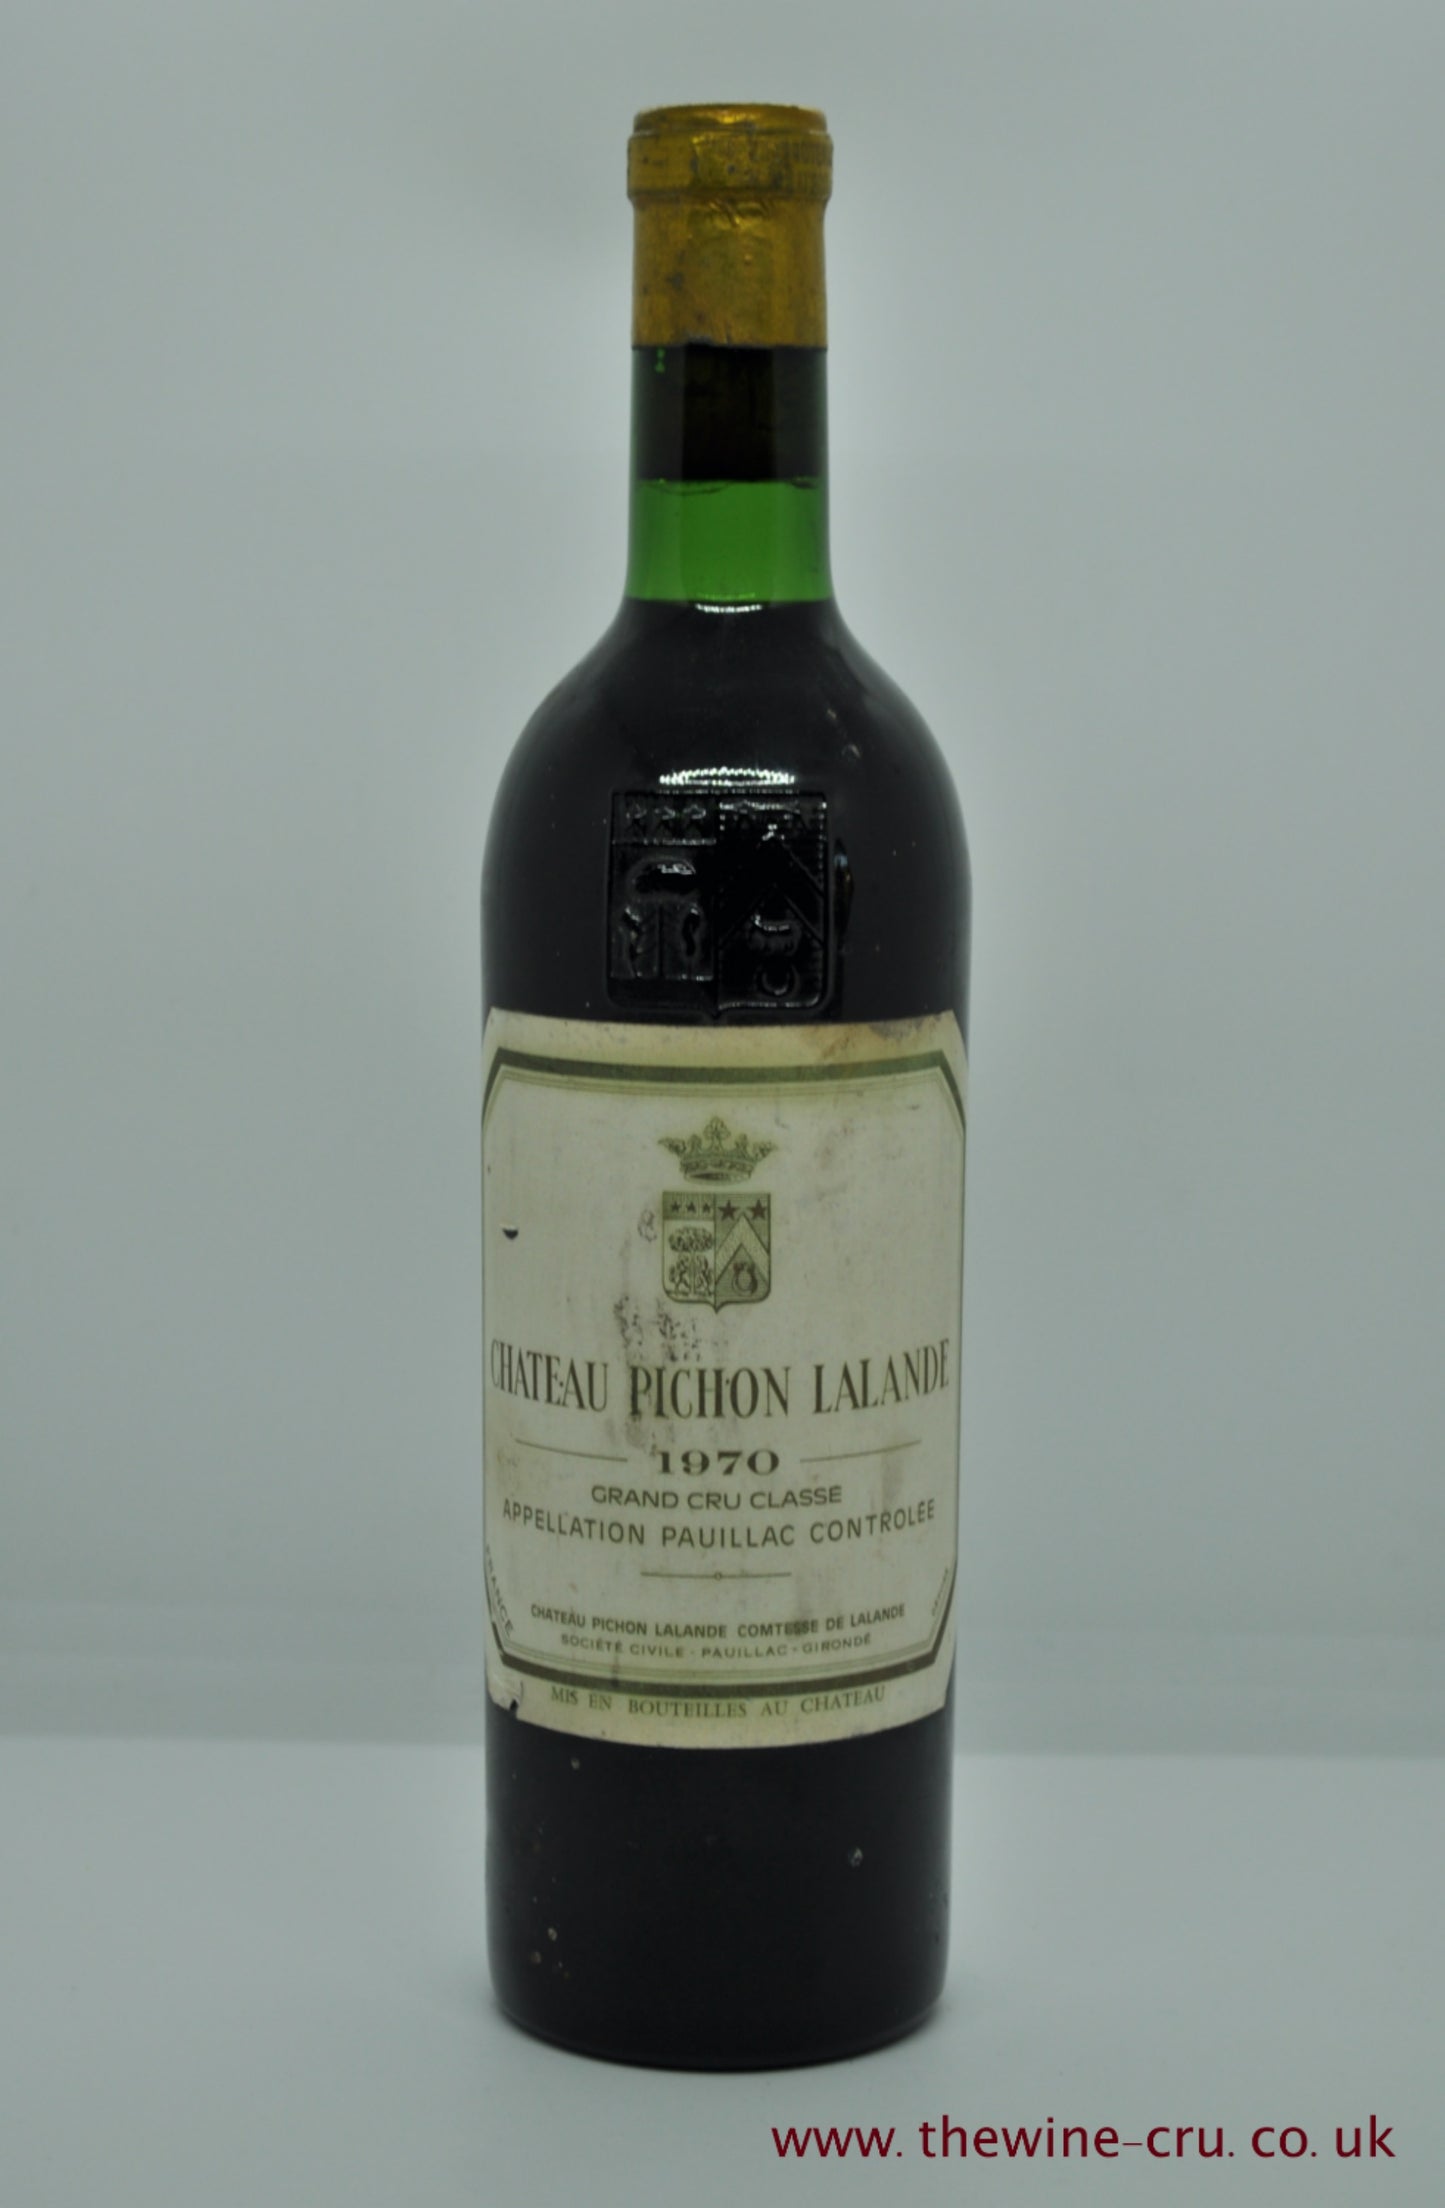 1970 vintage red wine. Chateau Pichon Lalande 1970. France, Bordeaux. Immediate delivery. Free local delivery. Gift wrapping available.